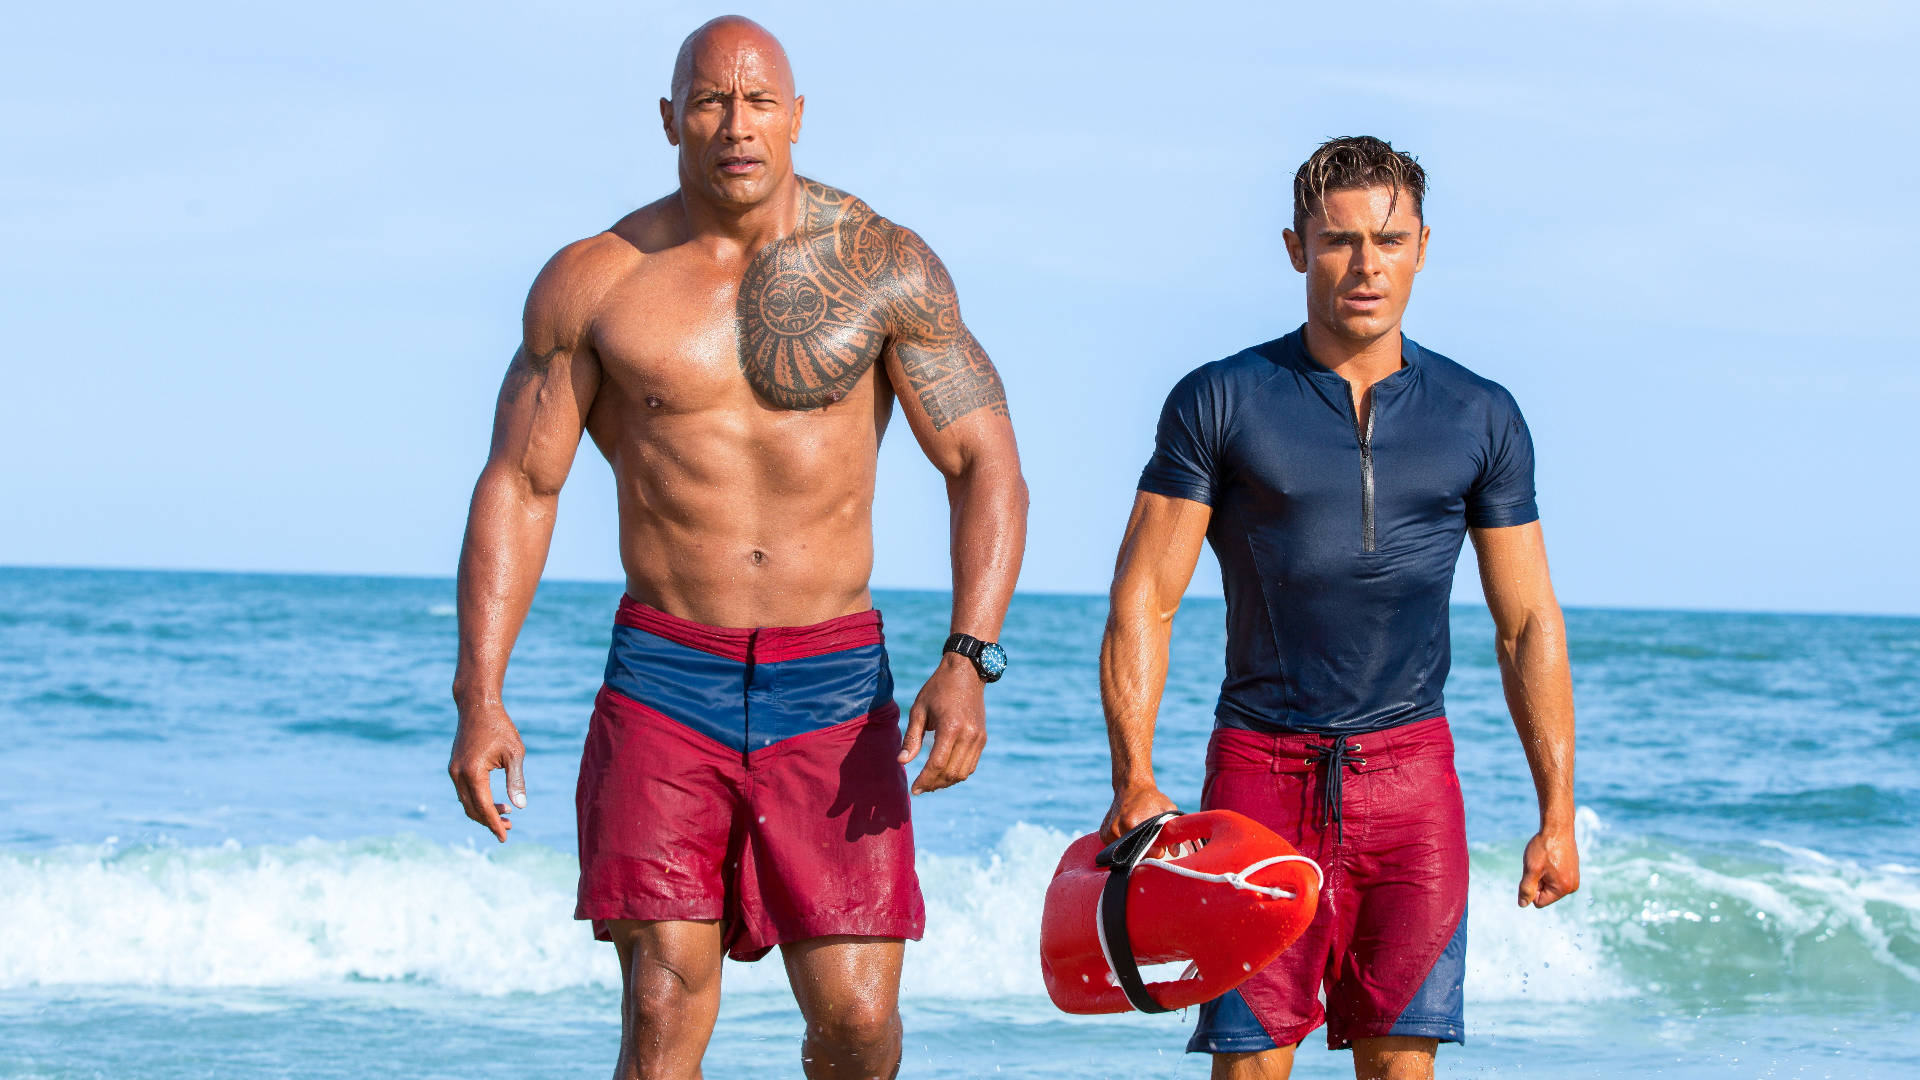 Dwayne Johnson and Zac Efron team up for Baywatch Wallpaper